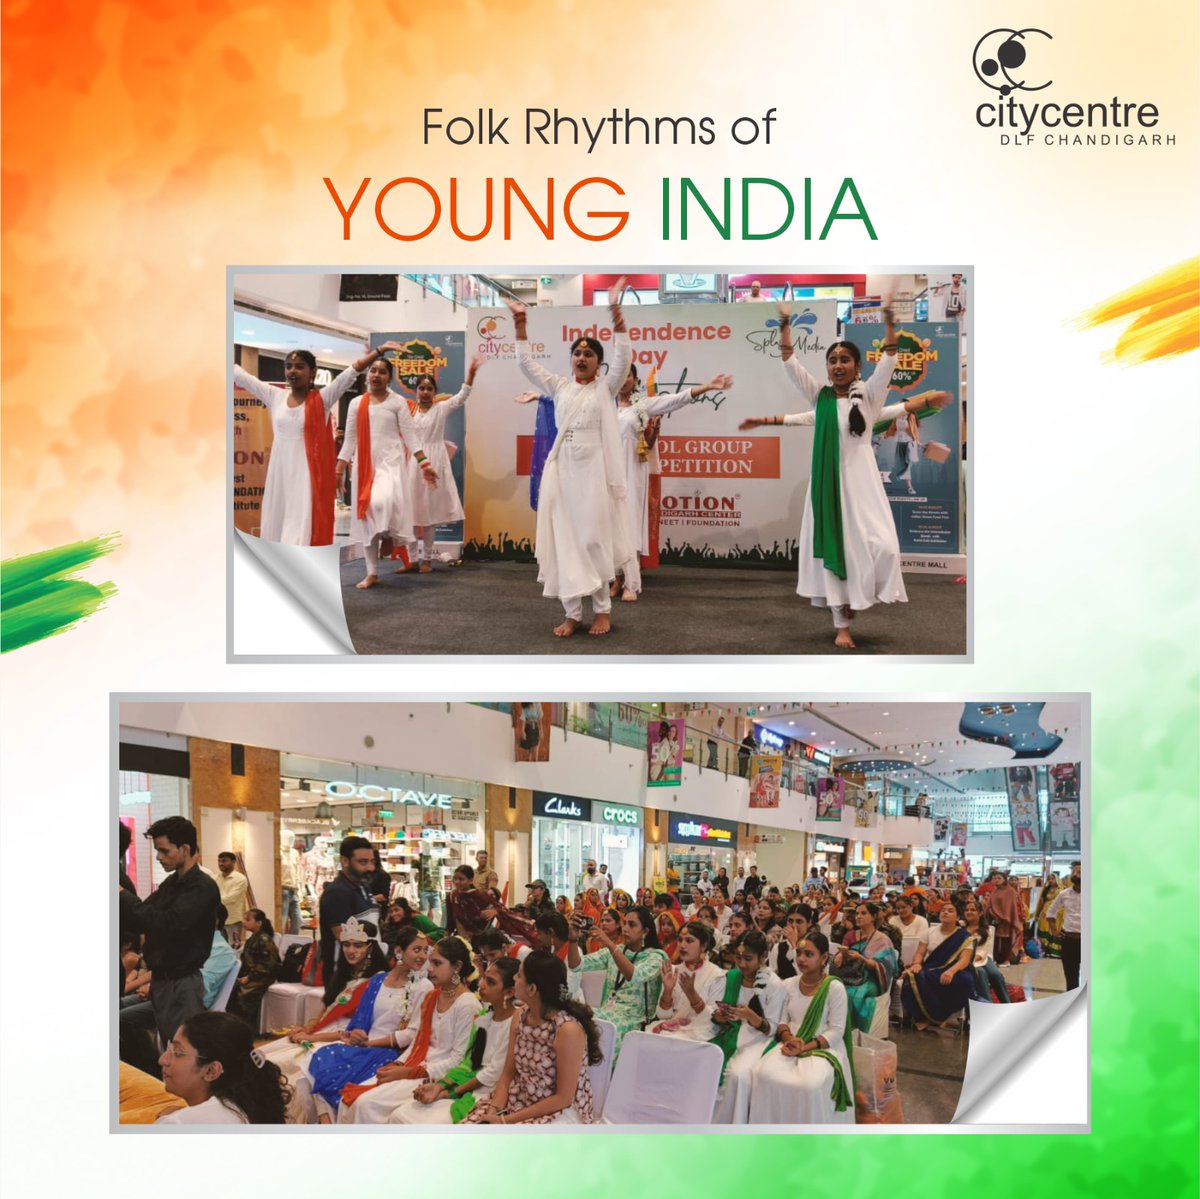 Folk Rhythms of #YoungIndia!
#DLFCityCentreChandigarh  celebrates the Patriotic Spectacle as City Kids performed the diverse Folk Forms of Independent India.
#HappyIndependenceDay #76Years #HarGharTiranga #FolkDance  #IndependenceDayCelebration #ShoppingMall #ITPark #Chandigarh